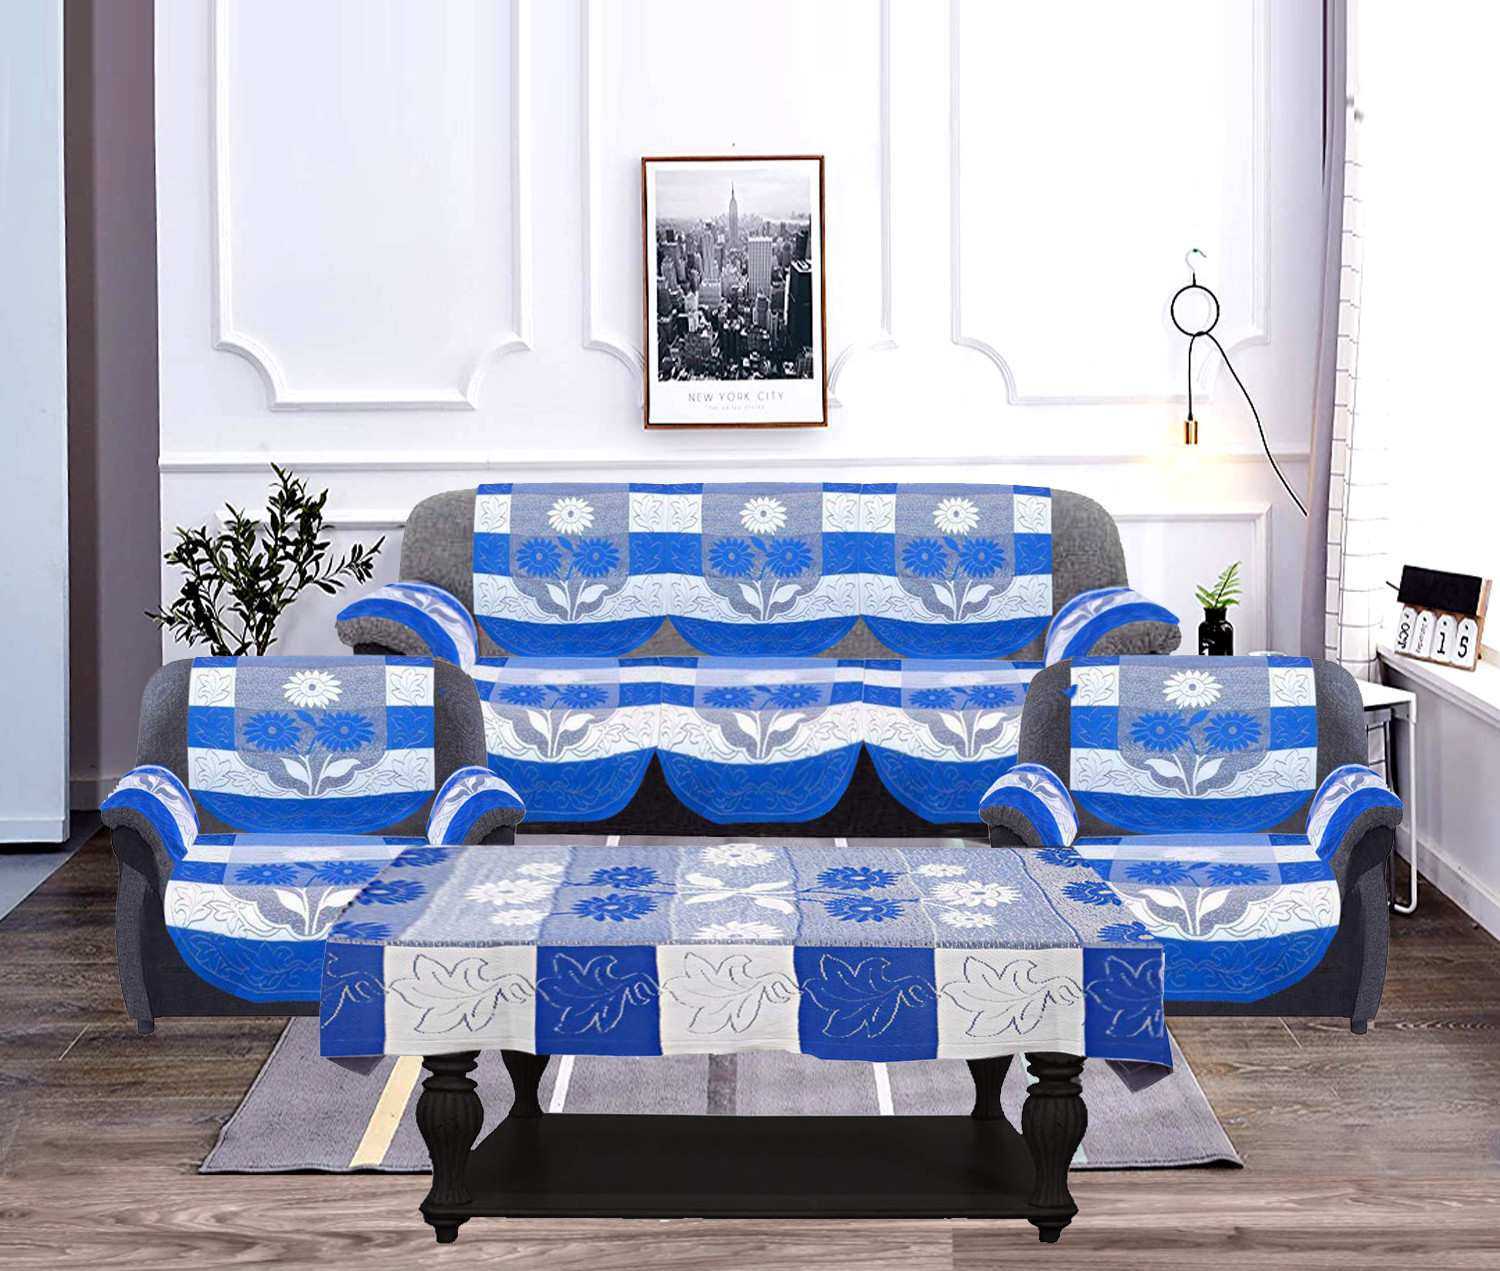 Kuber Industries Flower Design Cotton 5 Seater Sofa Cover With 6 Pieces Arms cover And 1 Center Table Cover Use Both Side, Living Room, Drawing Room, Bedroom, Guest Room (Set Of17, Blue)-KUBMRT12023